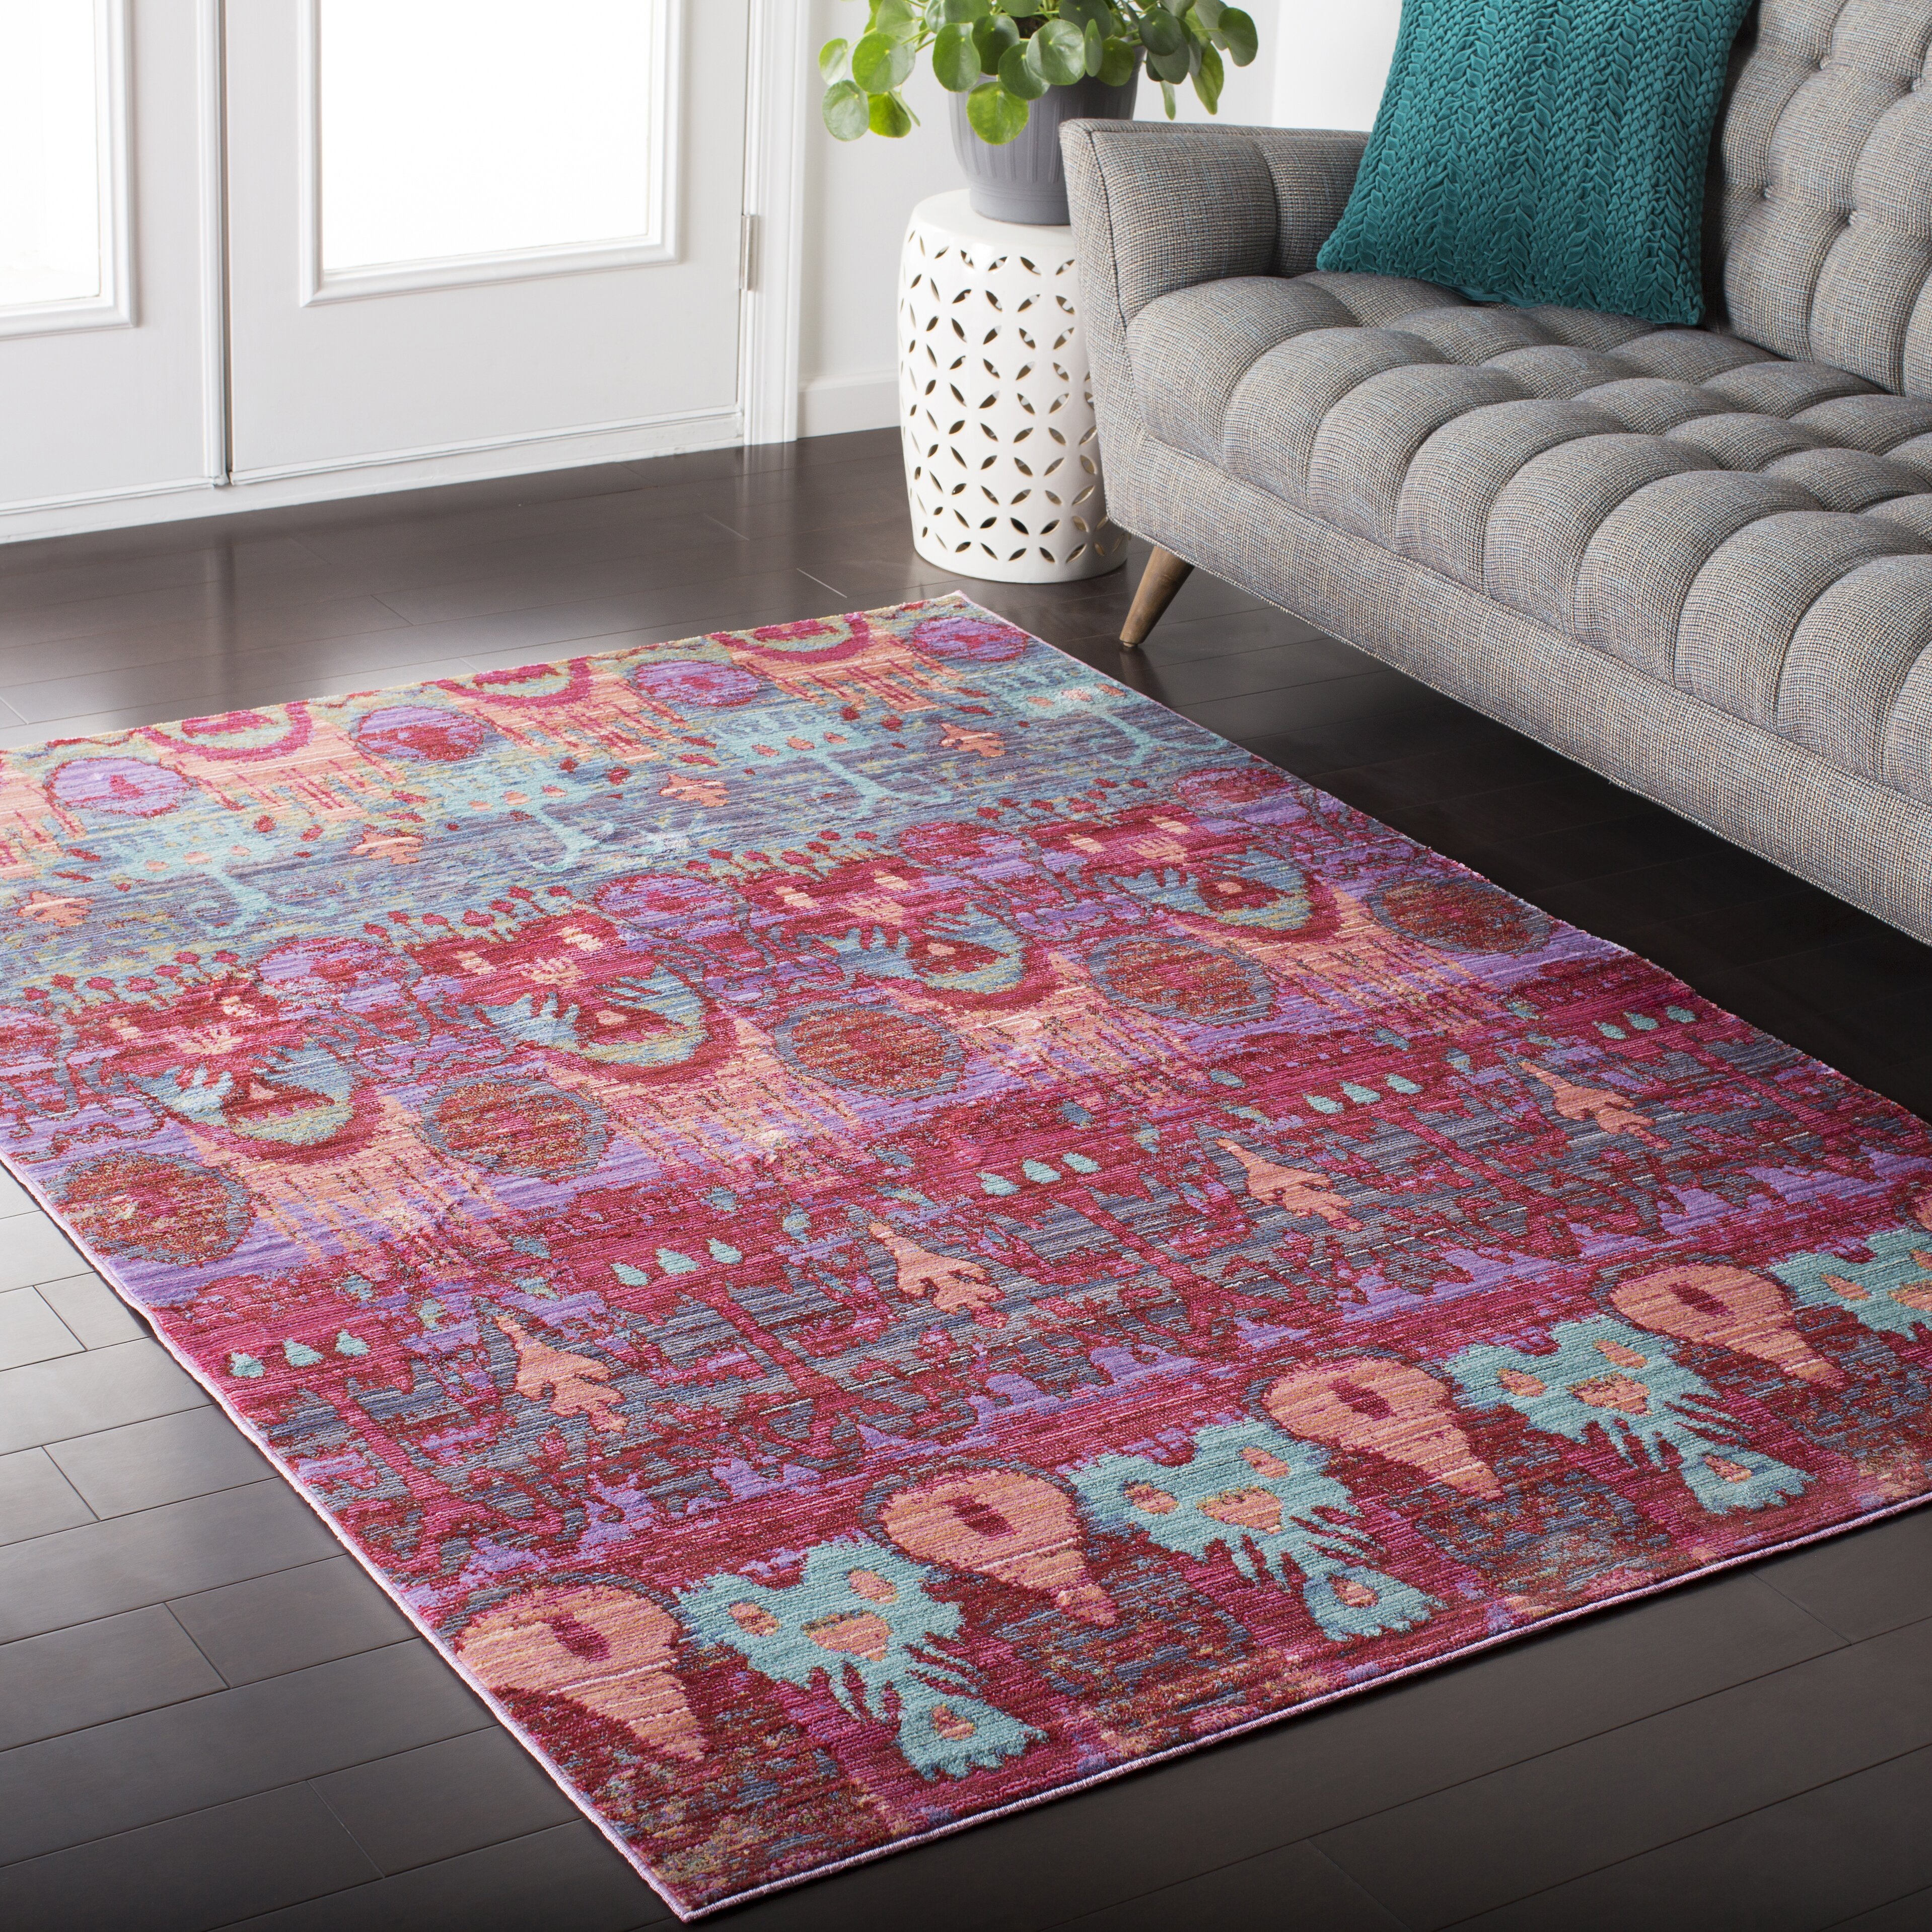 pink and green area rug